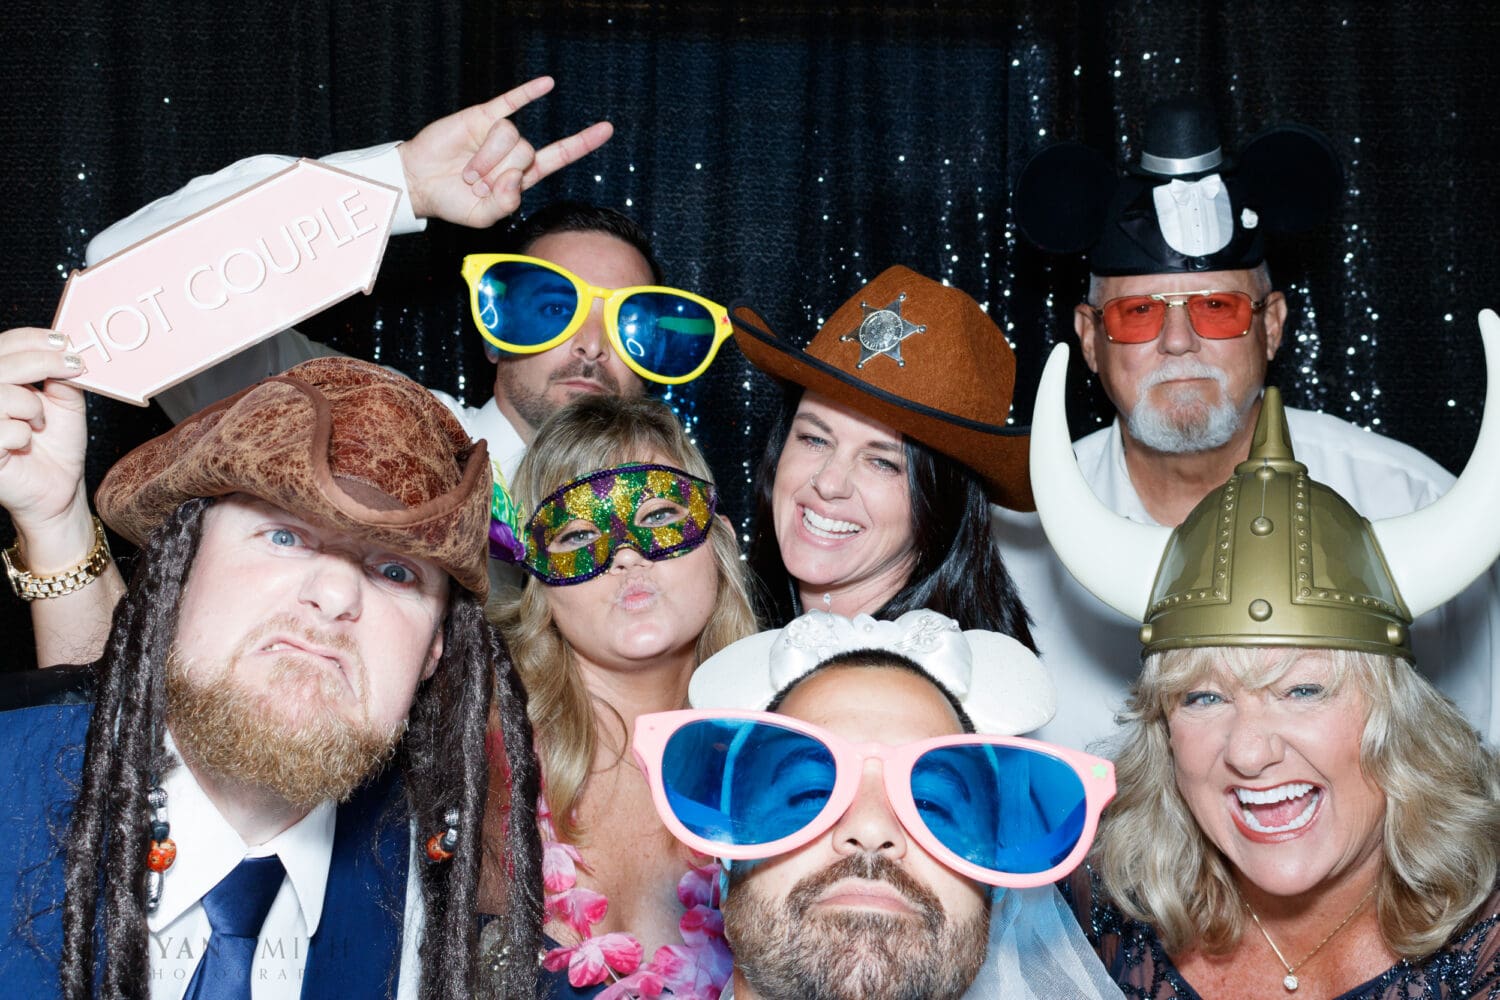 Photo booth pictures with black background - Dunes Golf & Beach Club